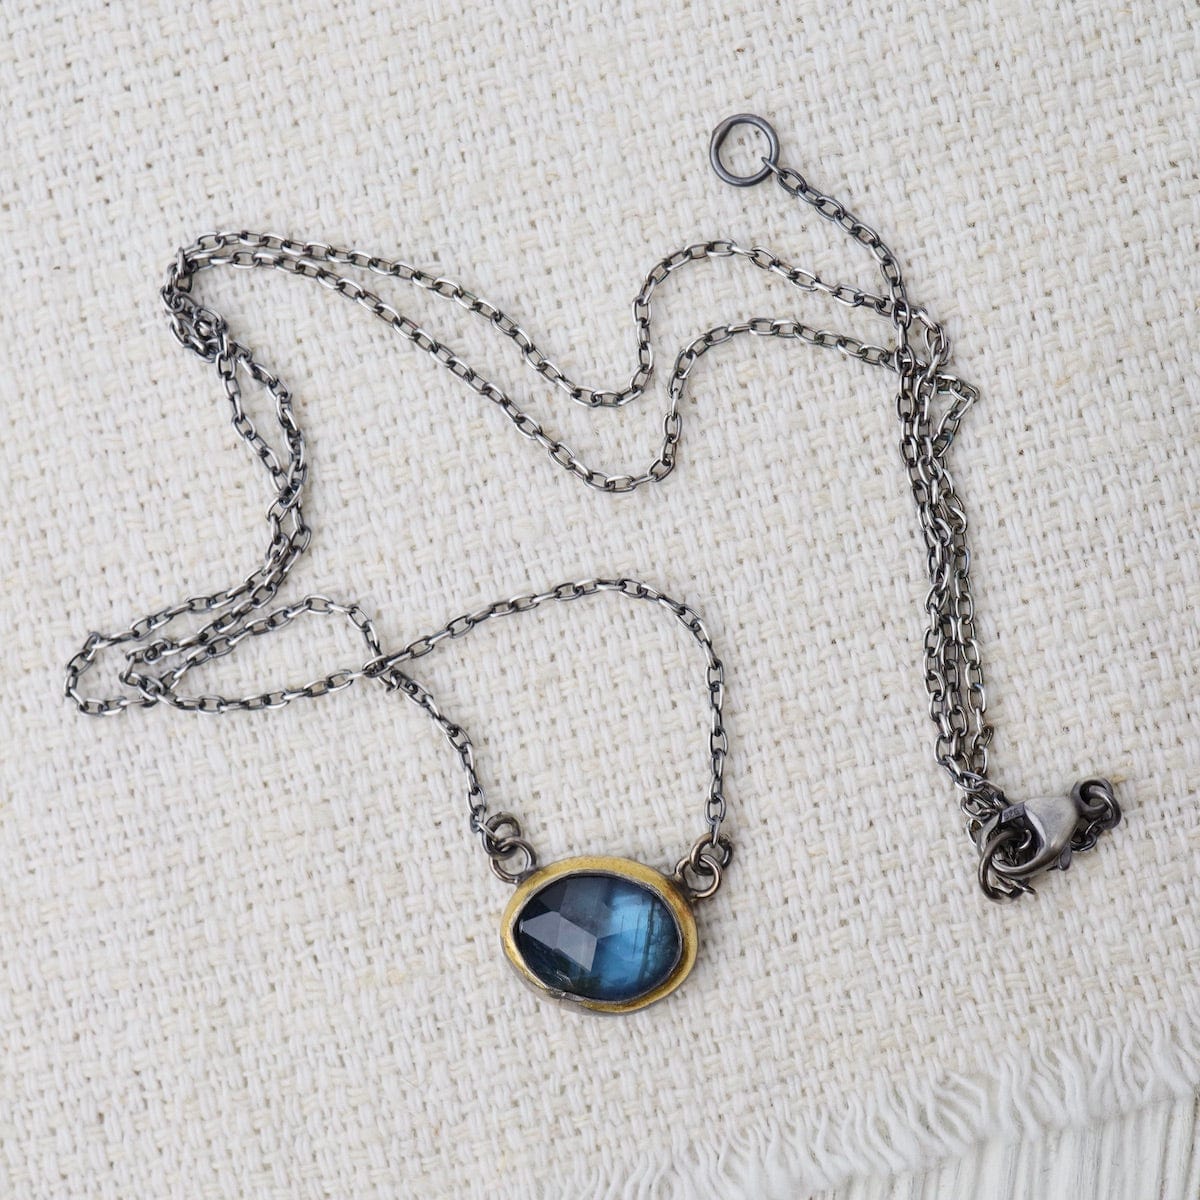 NKL Petite Crescent Rim Necklace with Teal Kyanite